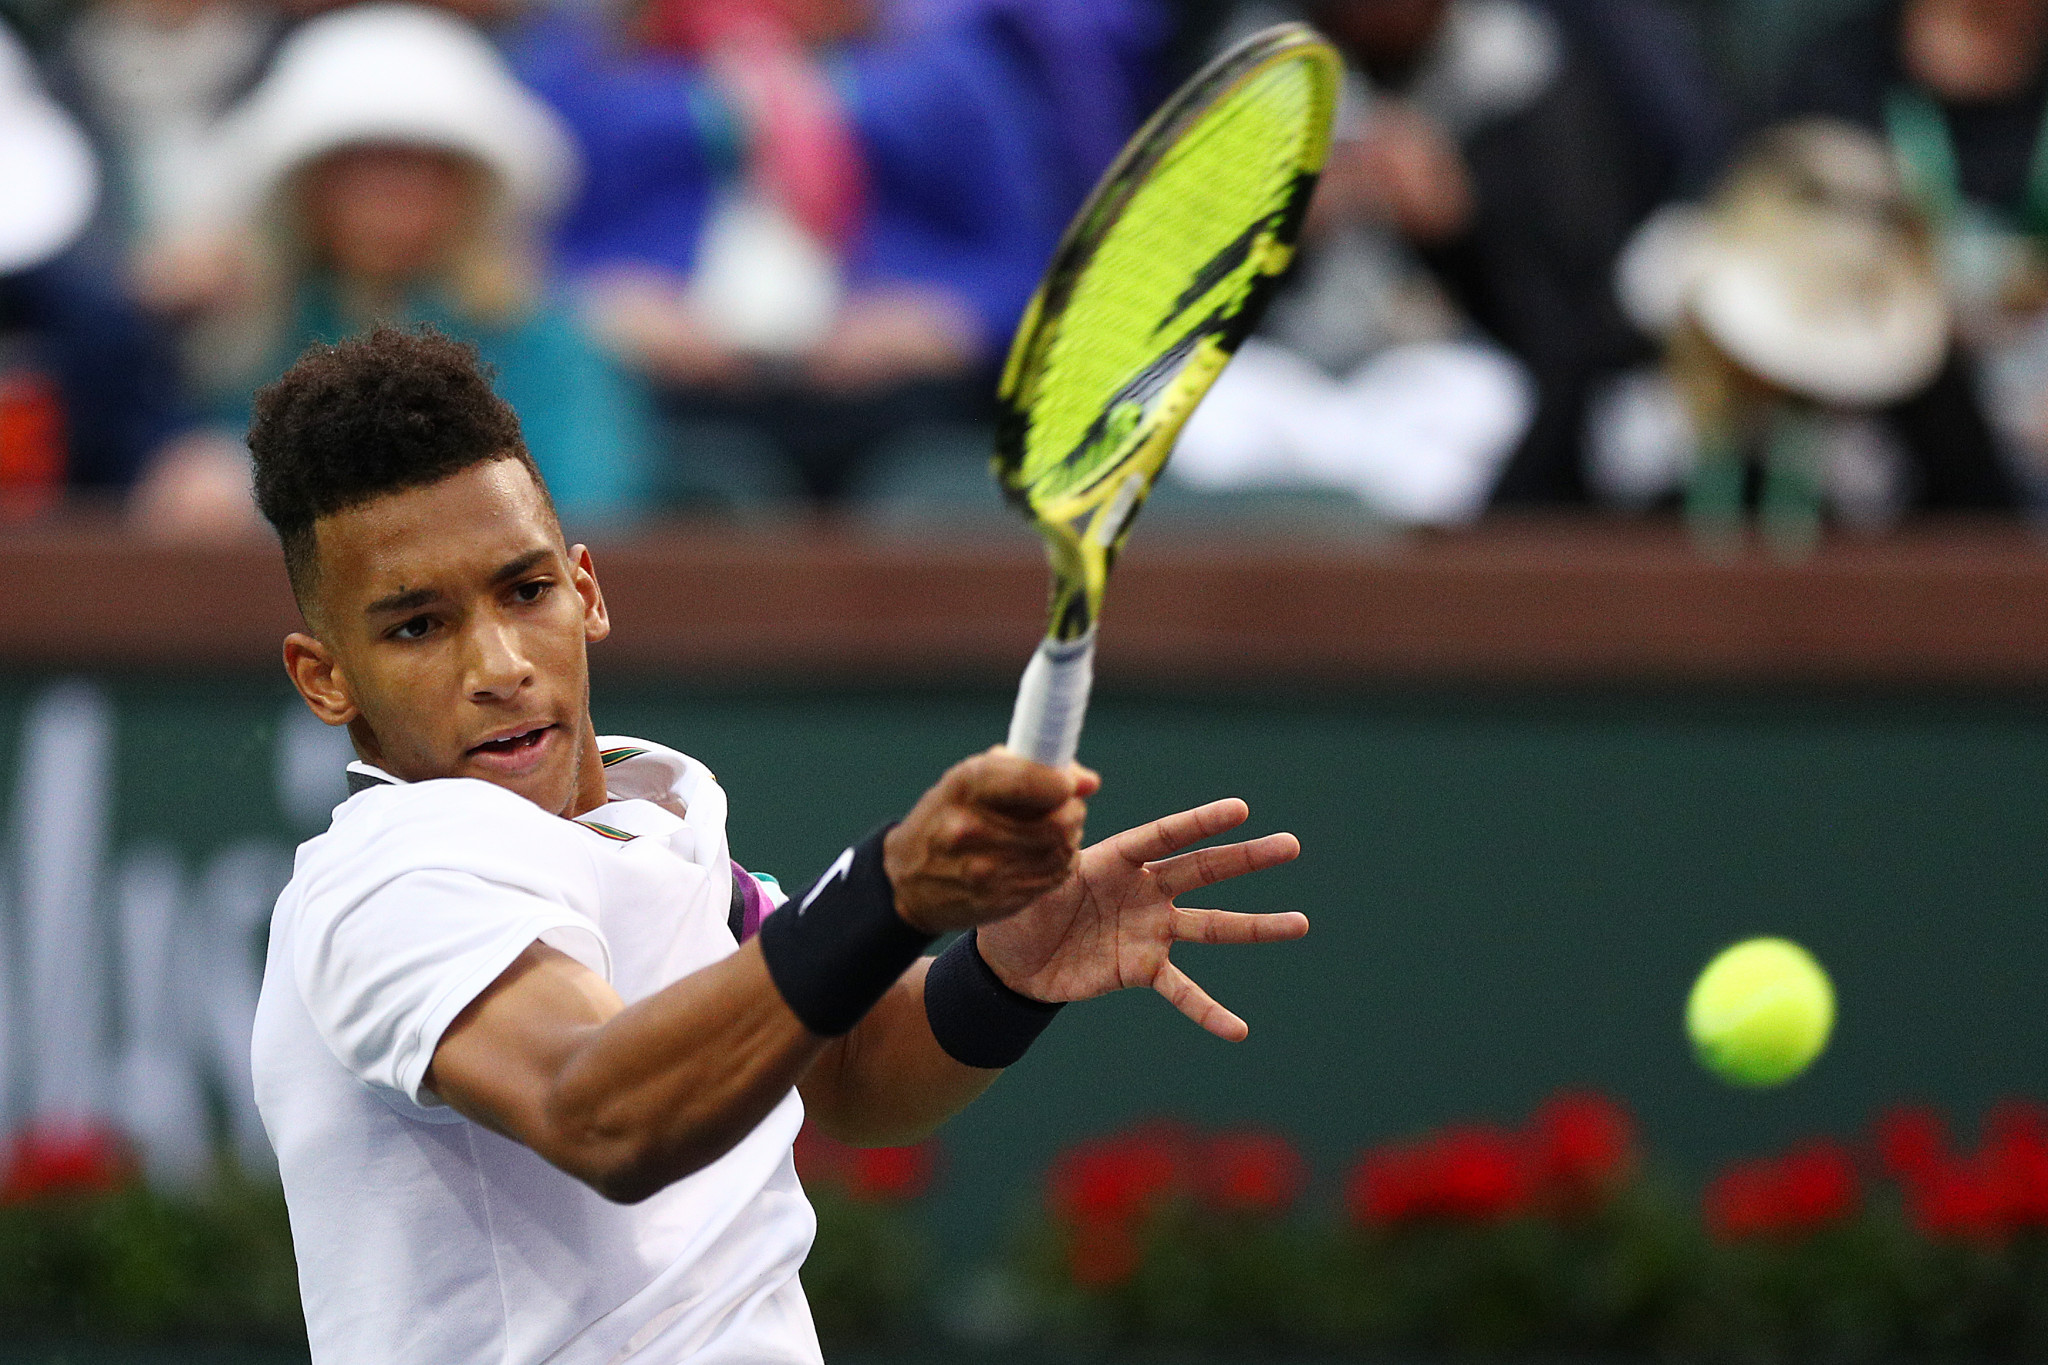 Canada's Felix Auger-Aliassime is one win away from making his main draw debut at the Miami Open after coming from behind to beat Italy's Luca Vanni in the first round of qualifying today ©Getty Images